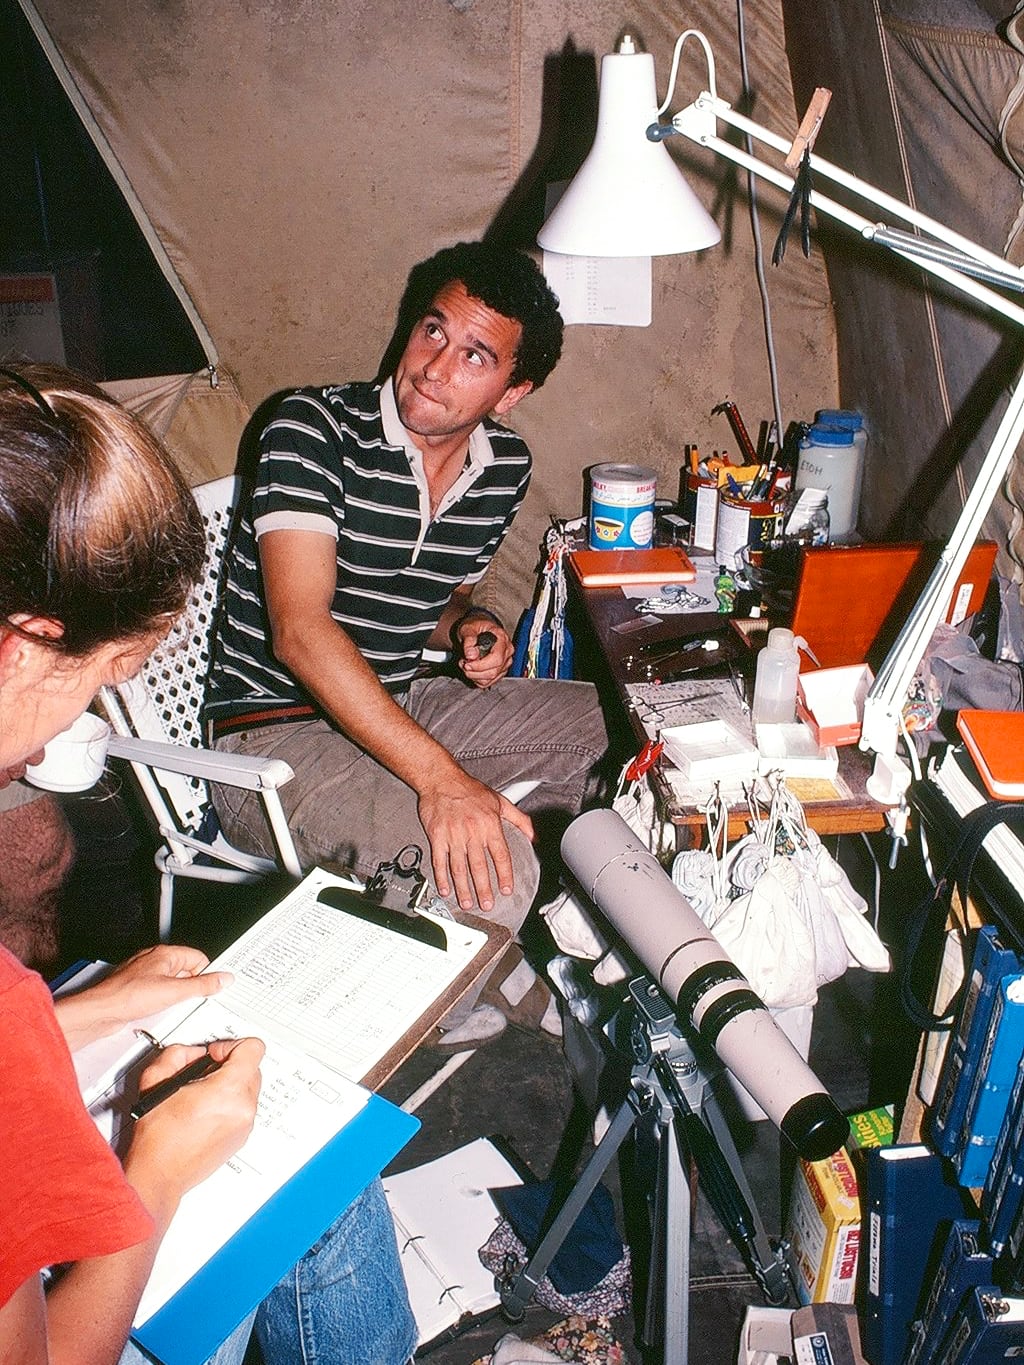 In the mid 1980s, Tom Smith spent three months researching the seedcracker from a tent in the rainforest.